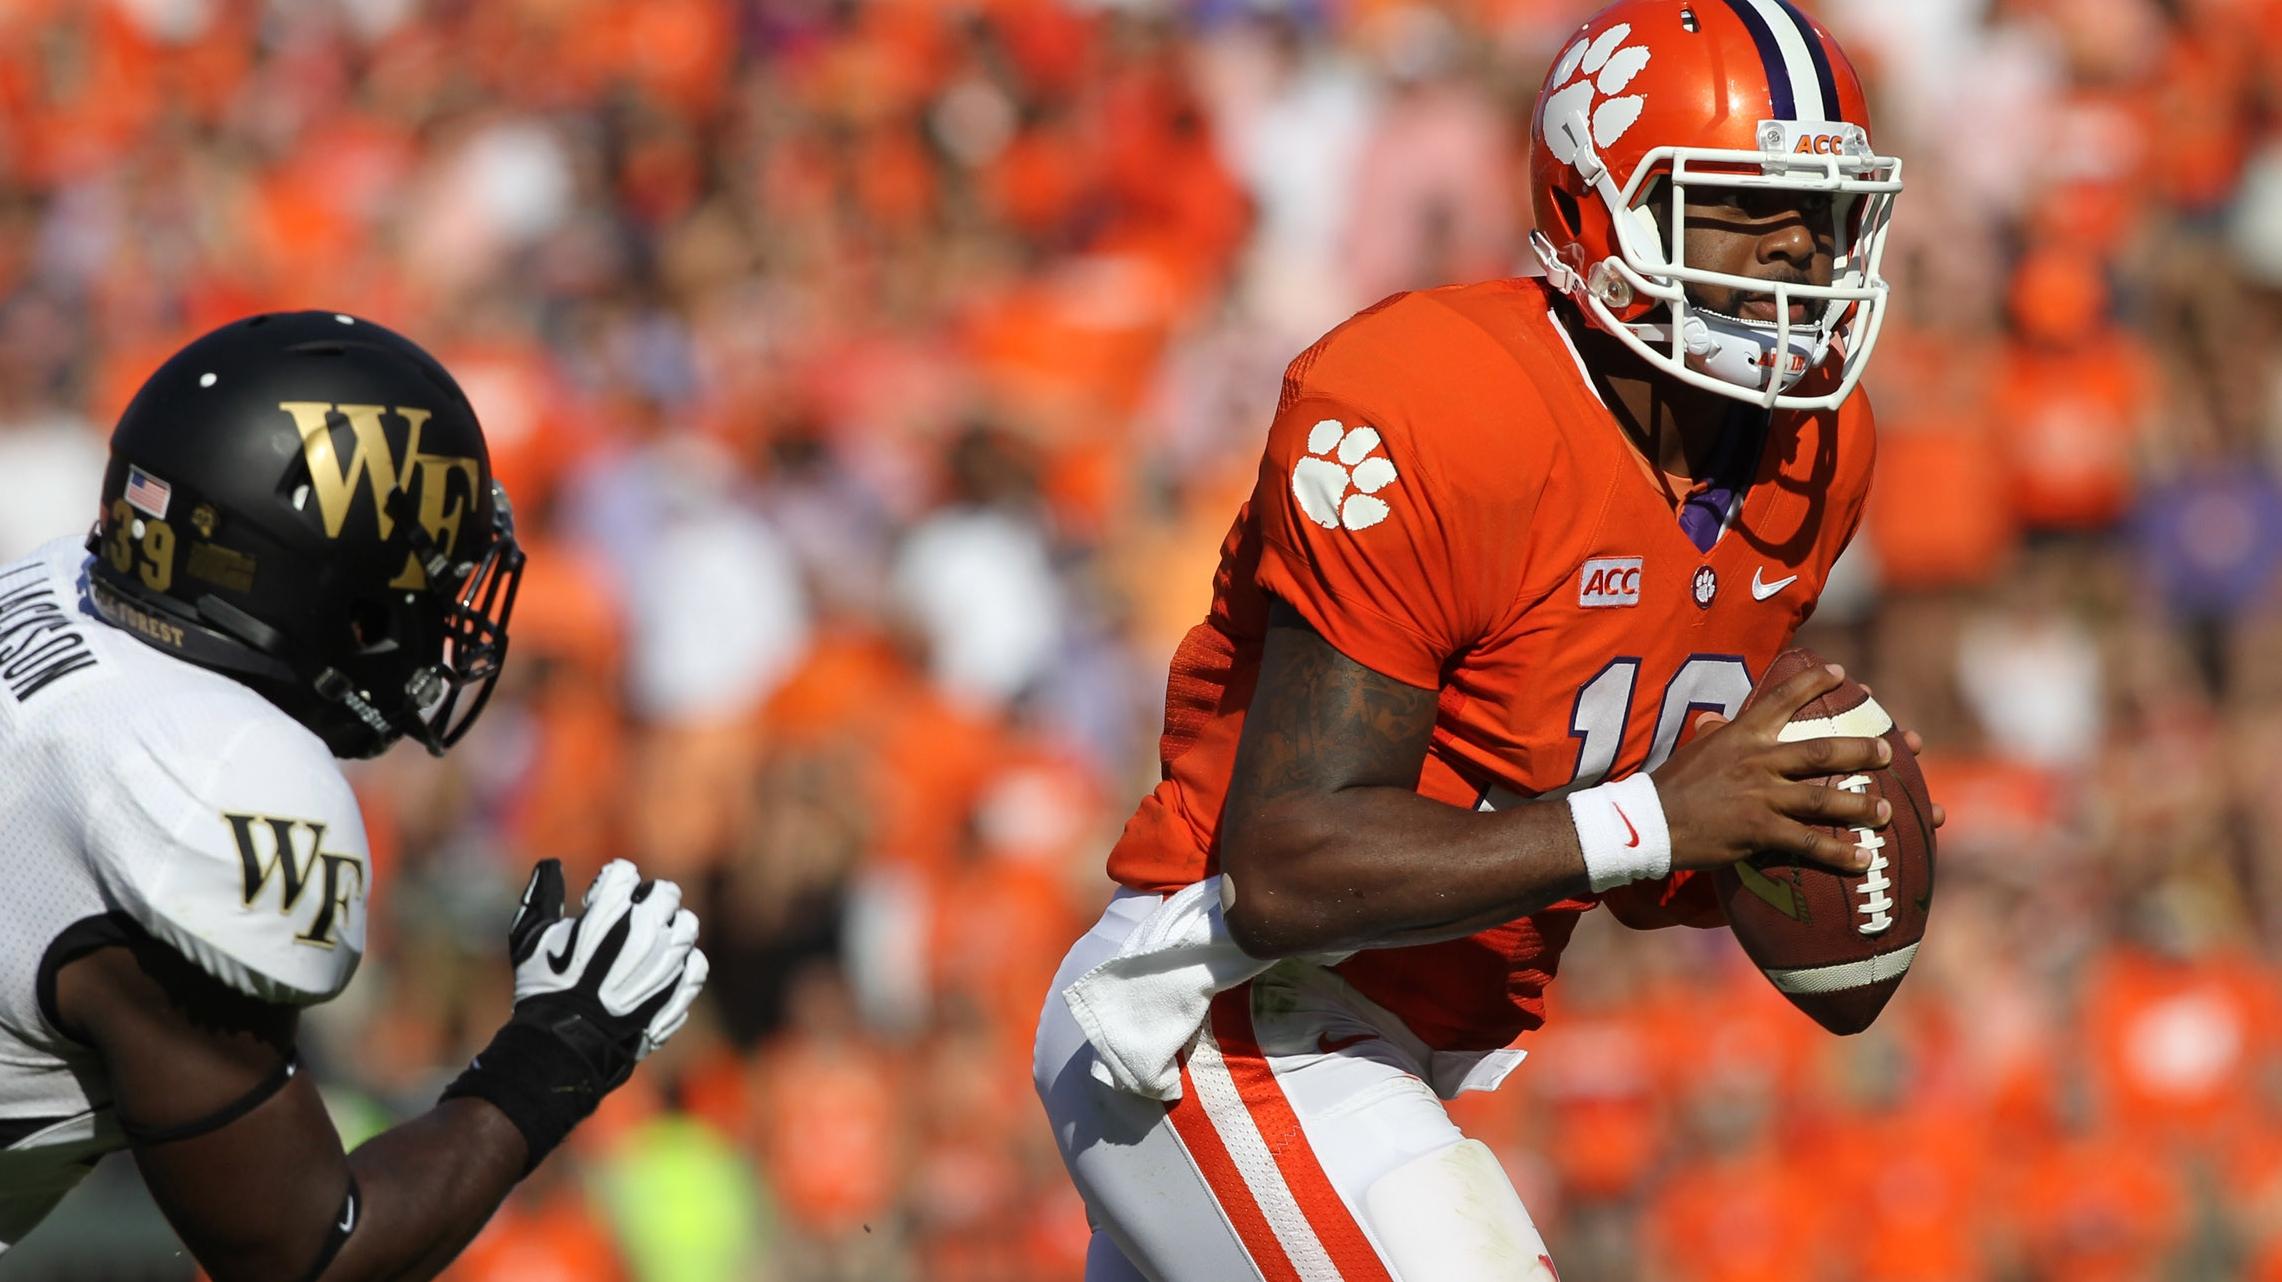 EXCLUSIVE: Tigers Set for Top-Five Showdown with FSU